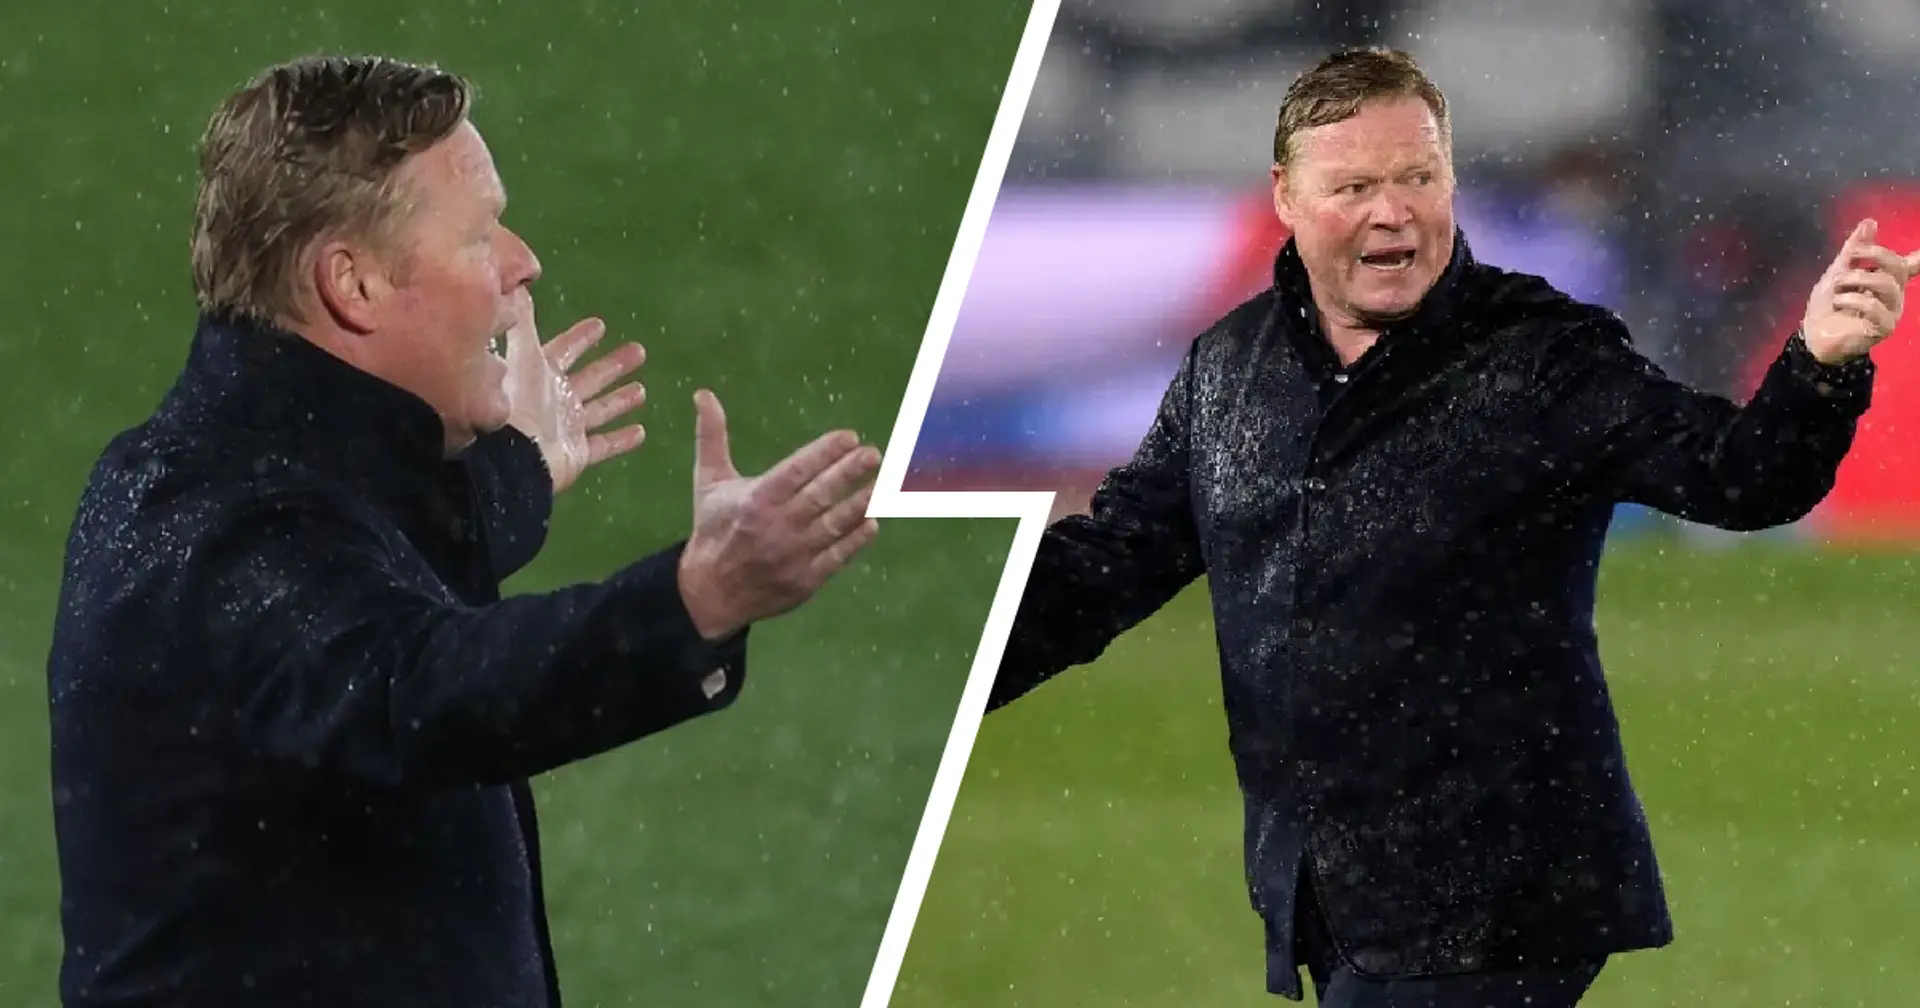 10 games Ronald Koeman has reportedly complained against VAR this season and why